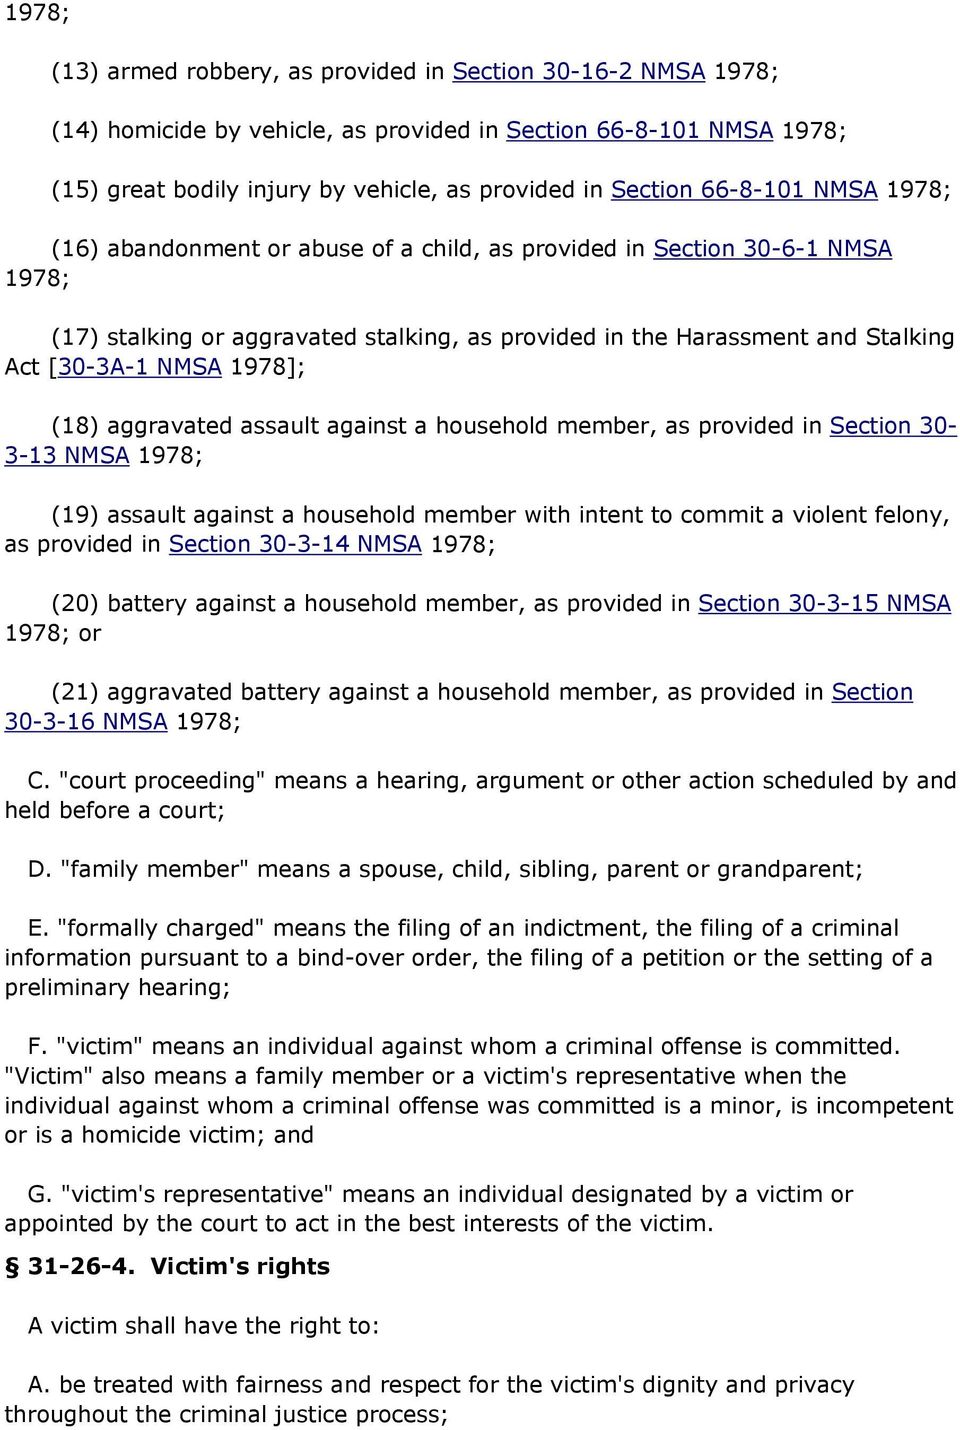 1978]; (18) aggravated assault against a household member, as provided in Section 30-3-13 NMSA 1978; (19) assault against a household member with intent to commit a violent felony, as provided in